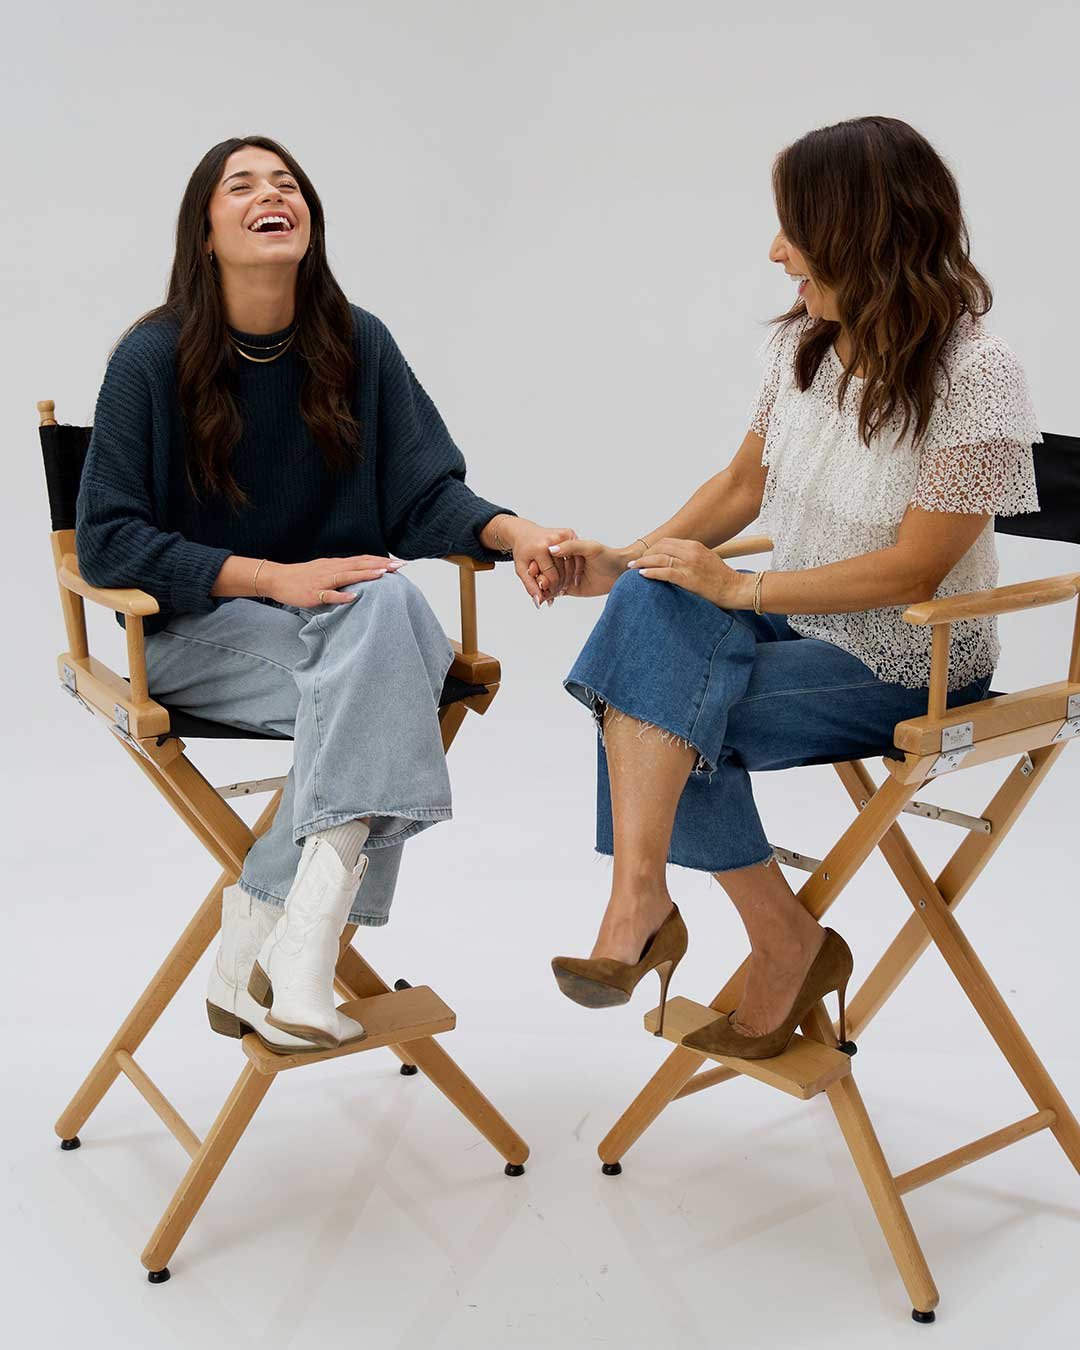 A mom and daughter laughing